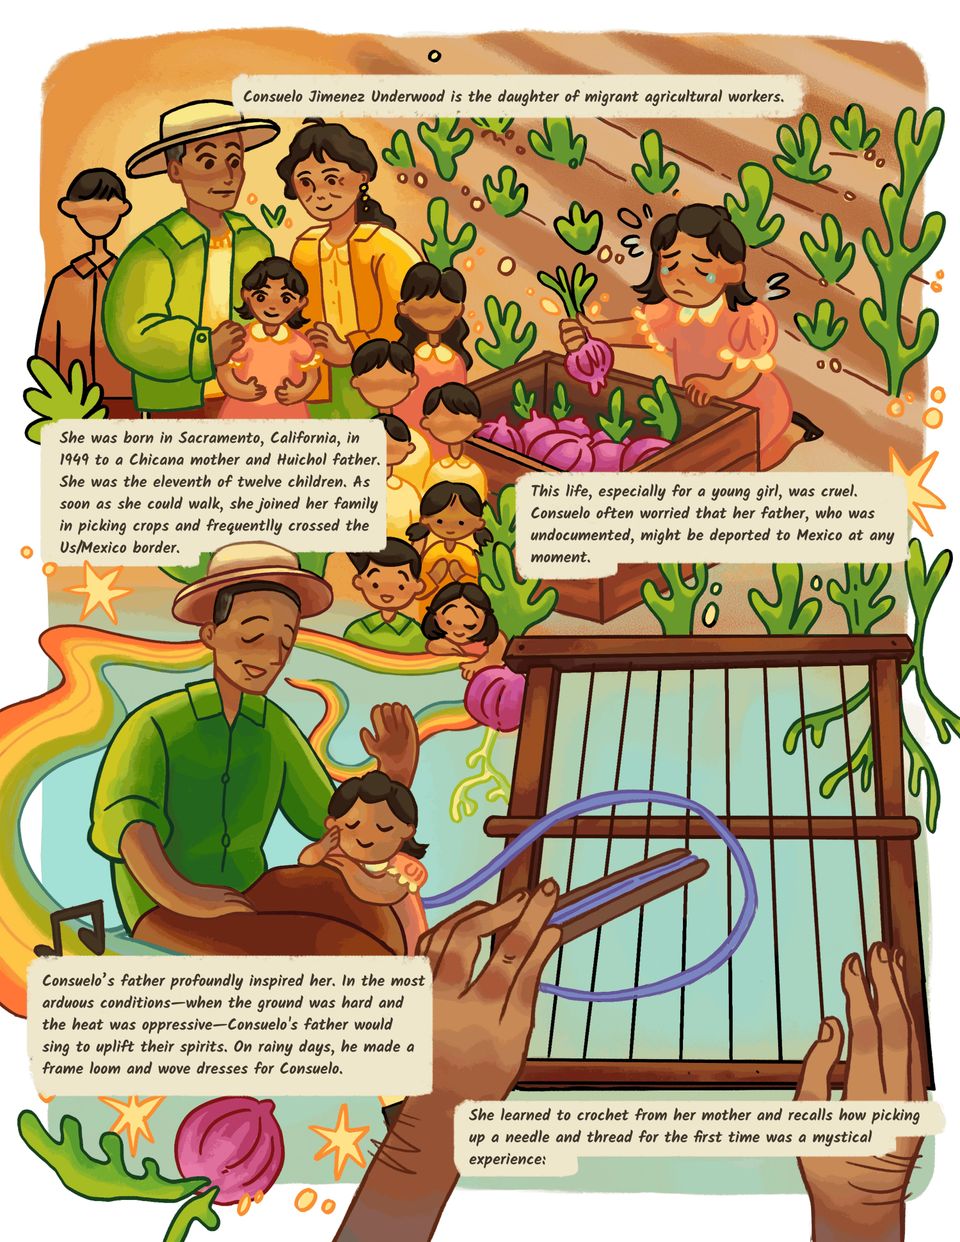 Illustration with text of Consuelo growing up picking crops in California and how her mother and father inspired her to begin weaving.